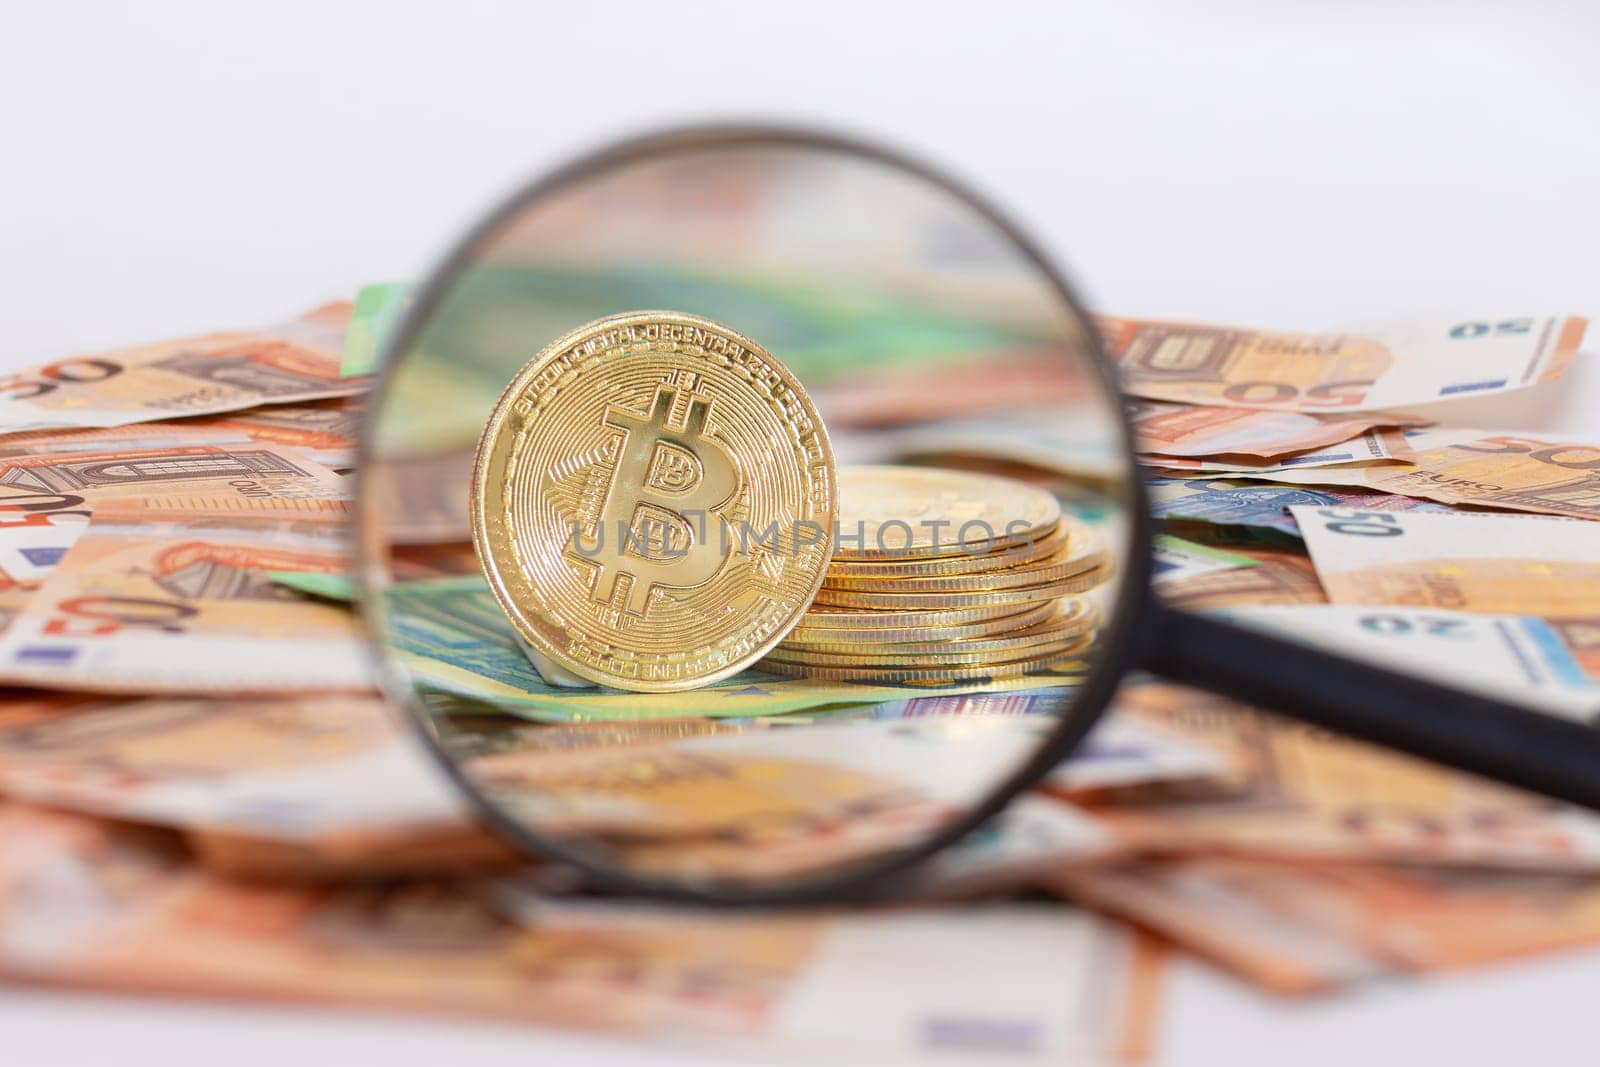 A Stack of Bitcoin Coins Visible Through a Magnifying Glass on the 50-Euro Banknotes by InfinitumProdux